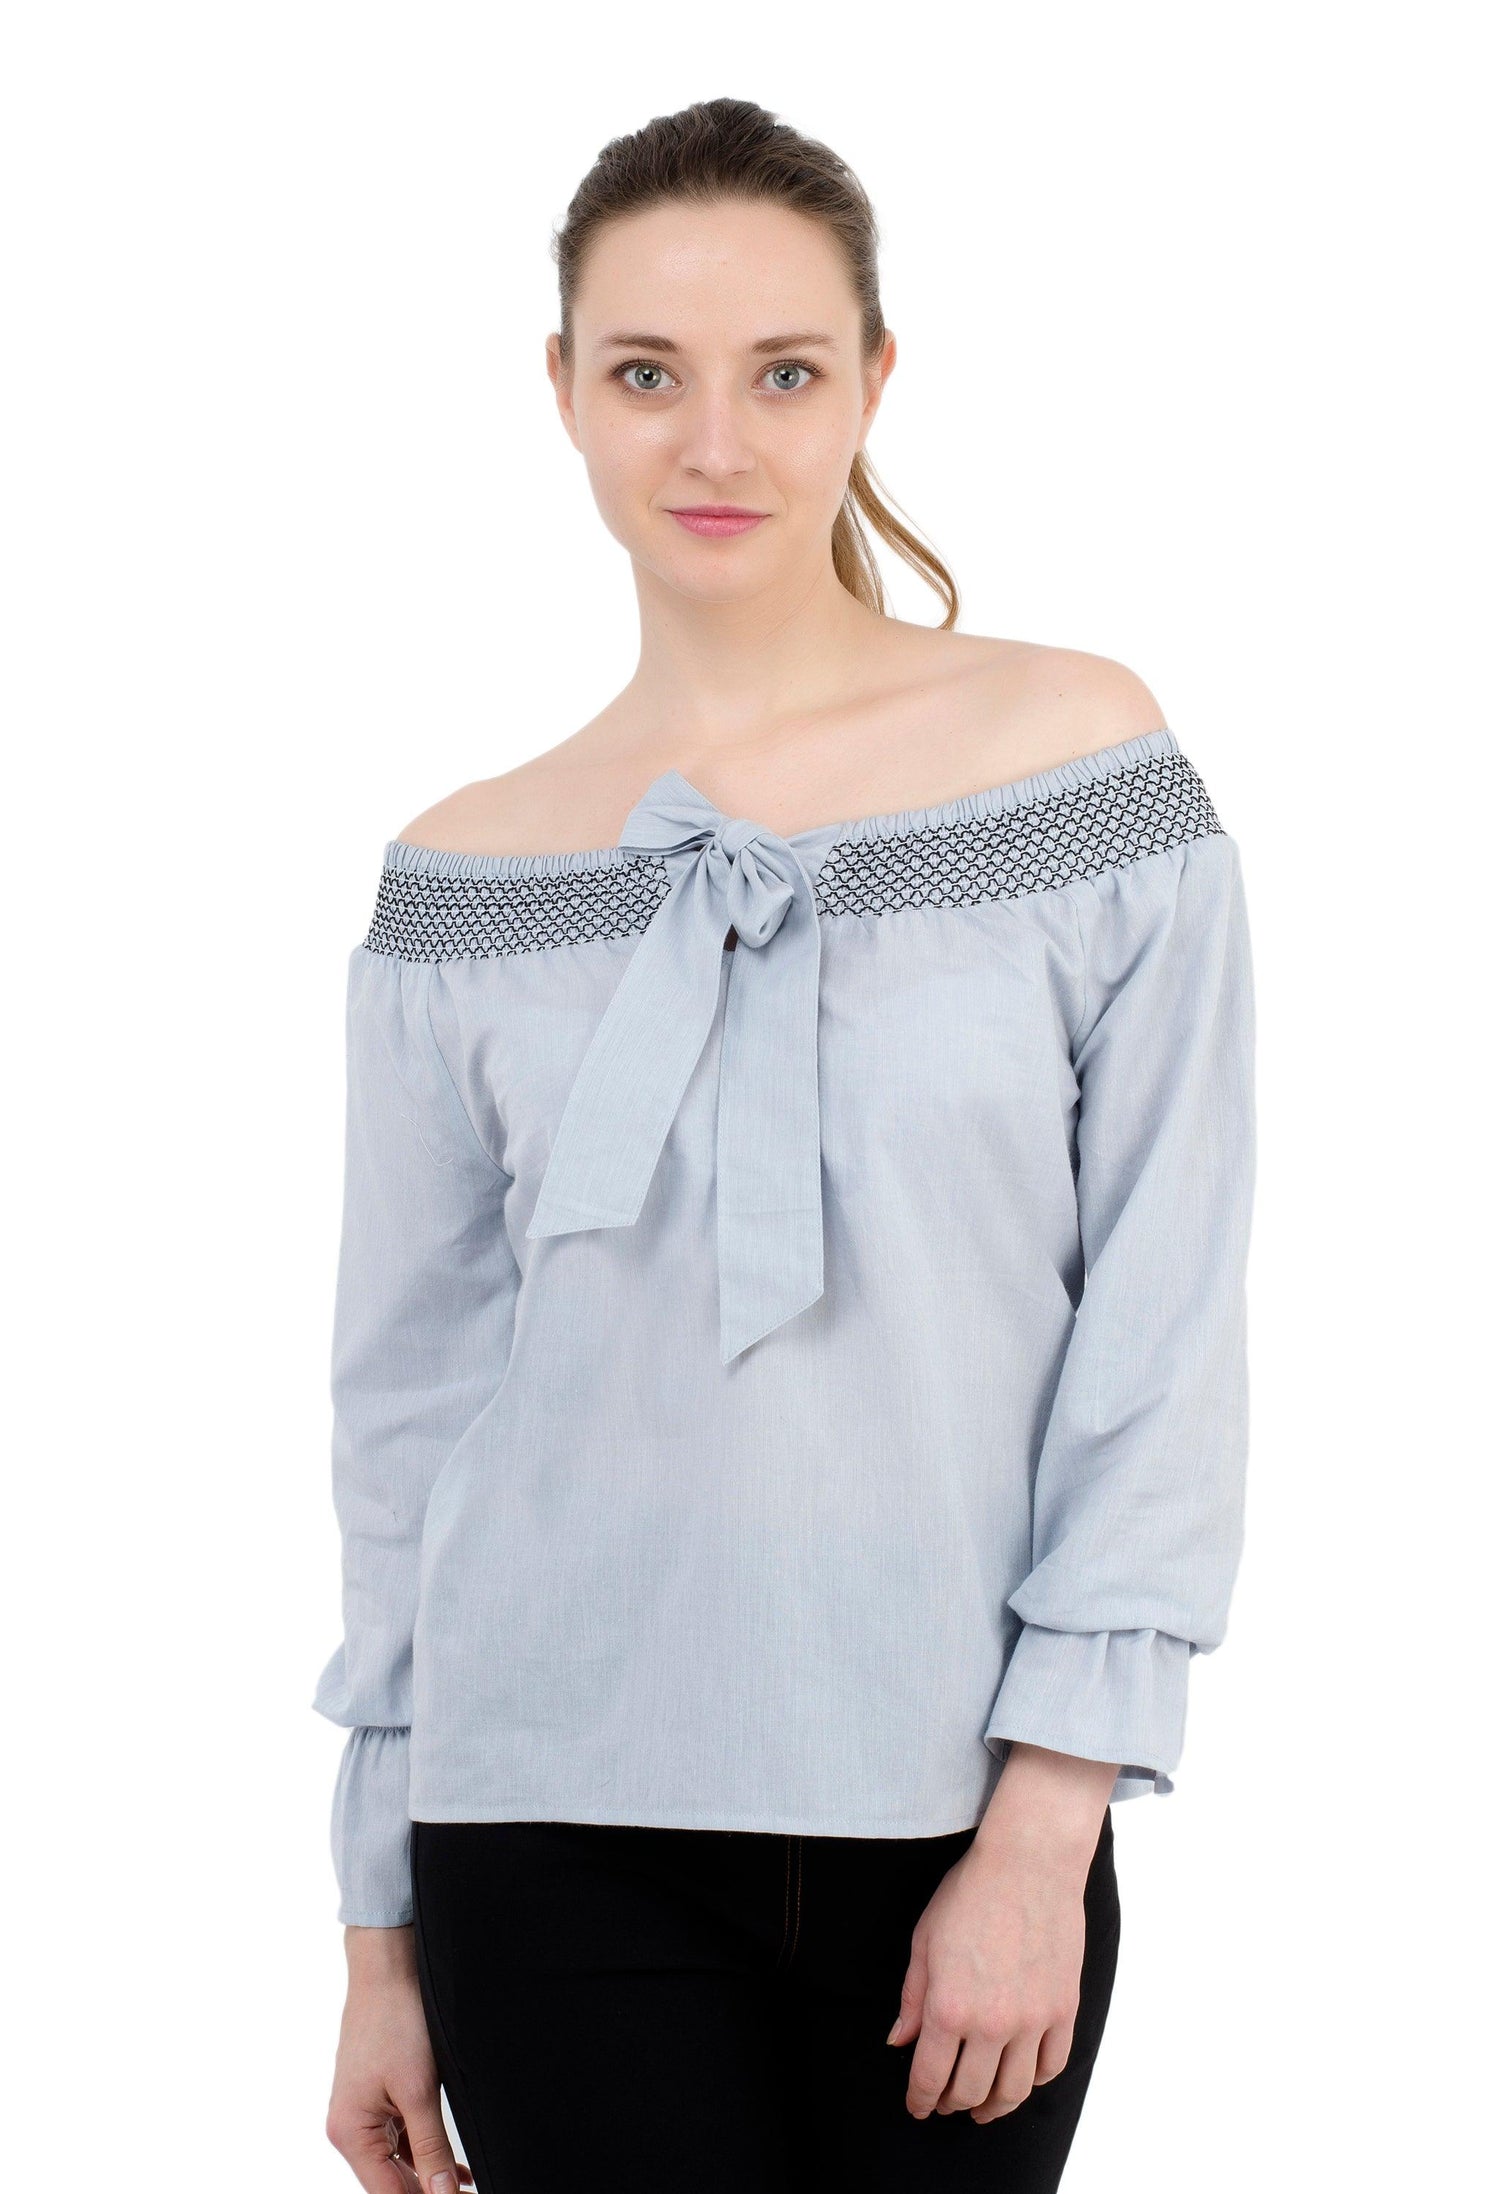 Sky Colour off shoulder top - Znxclothing